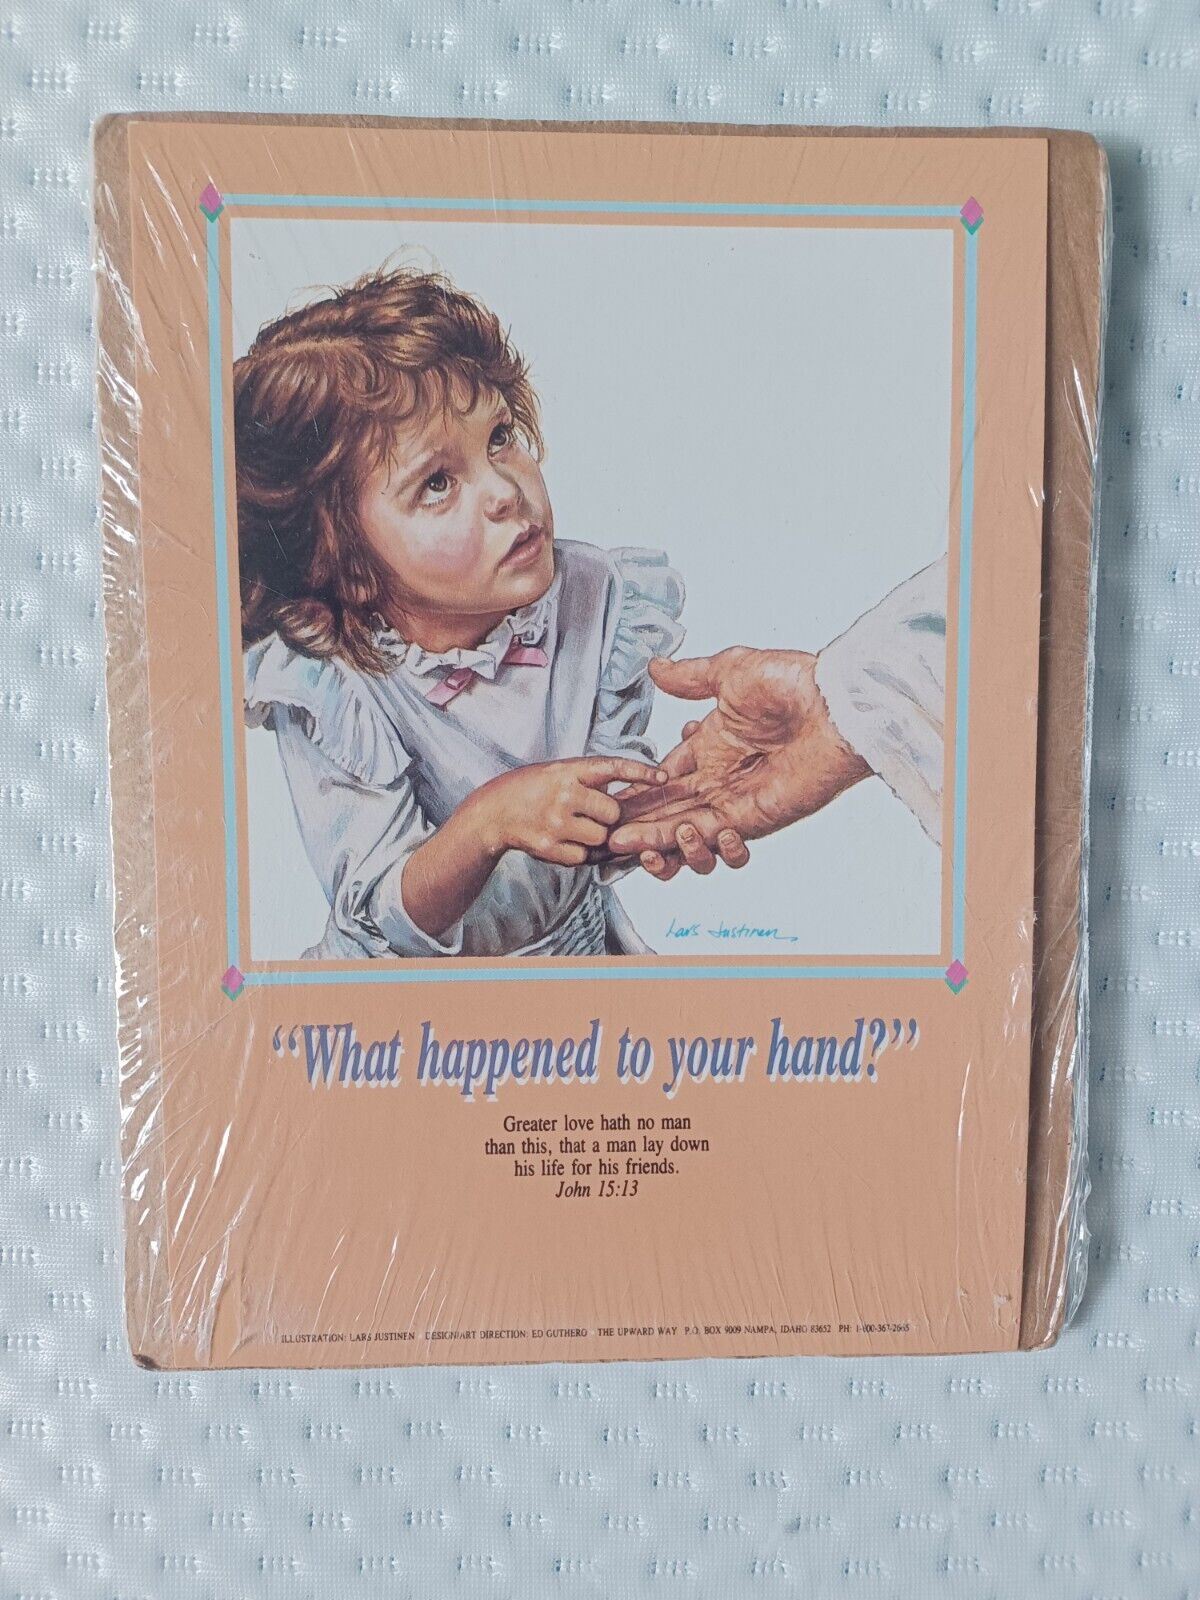 Vintage Print By Lars Justinen \'What Happened To Your Hand\' 5 X 7 New In Pkg